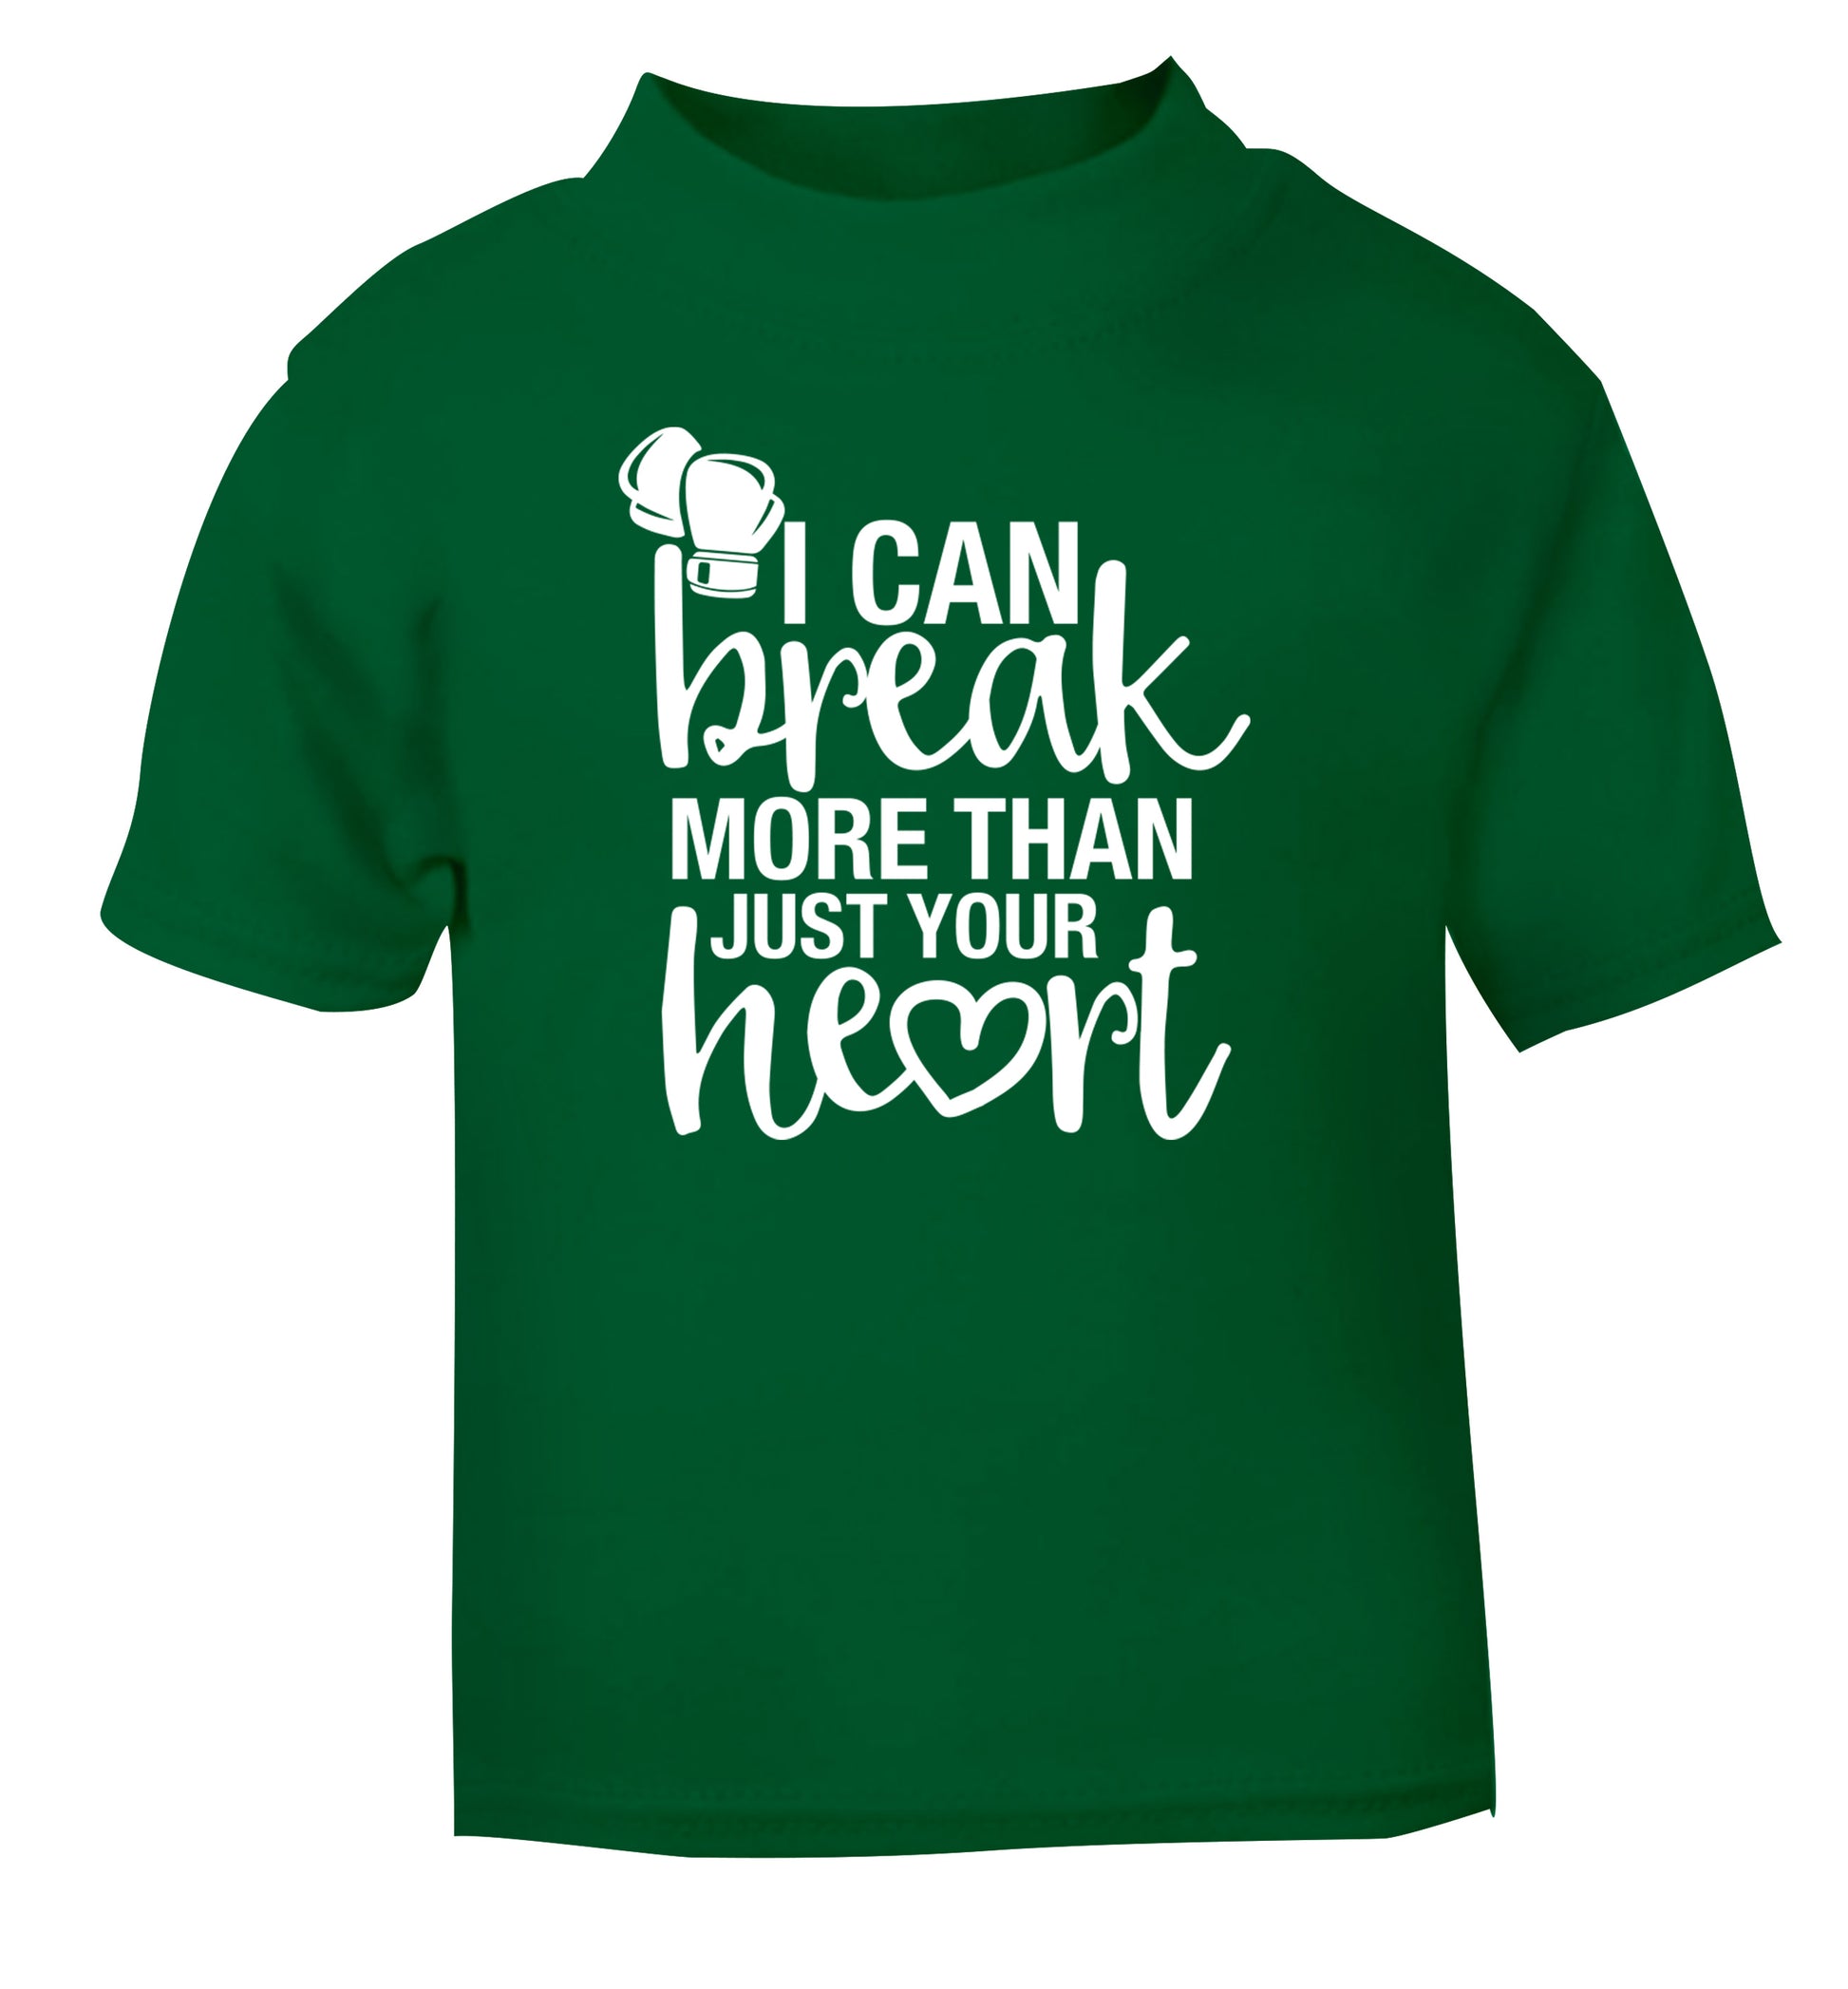 I can break more than just your heart green Baby Toddler Tshirt 2 Years